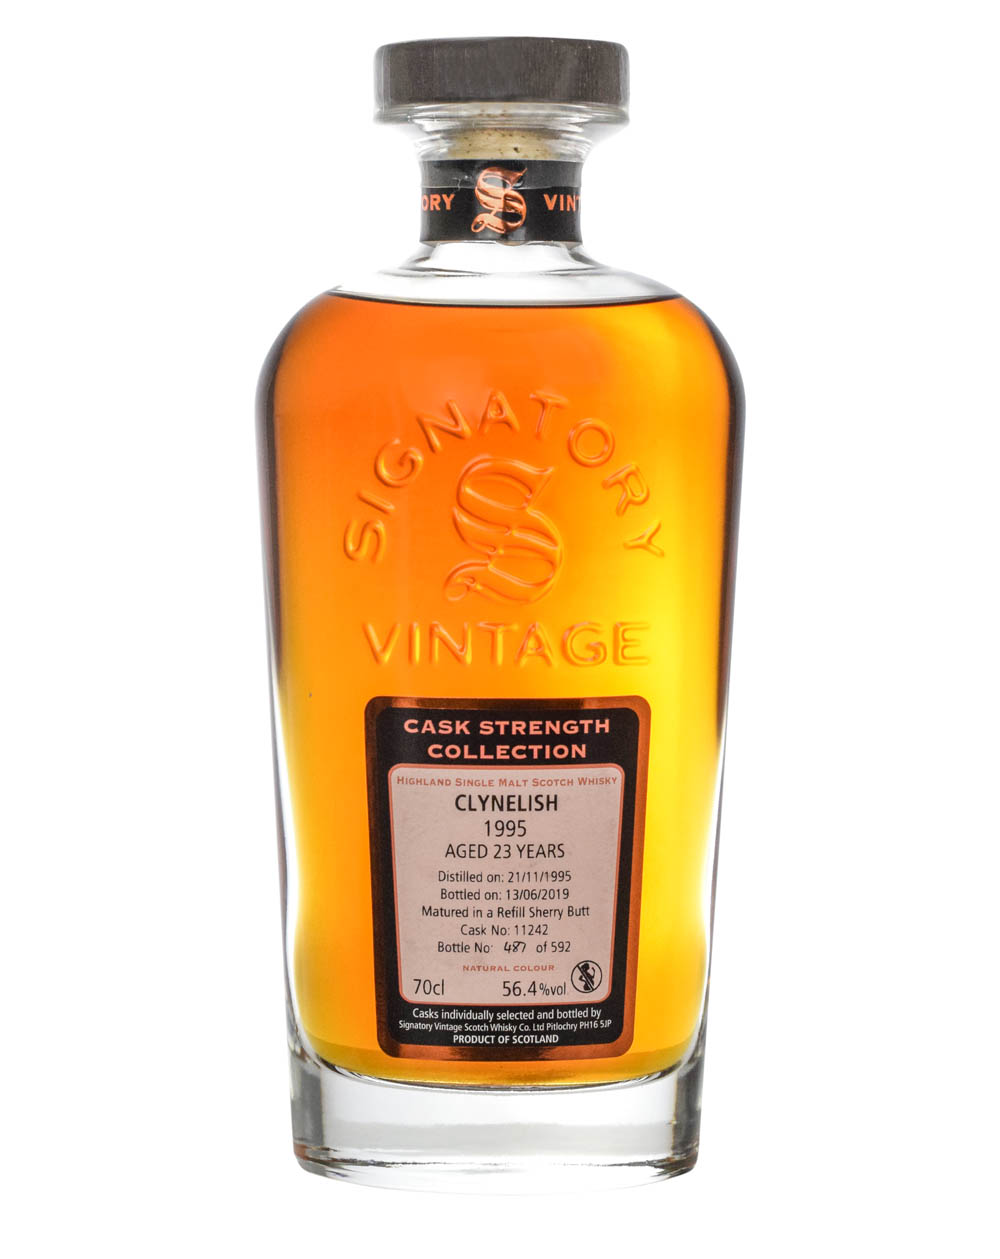 Clynelish 23 Years Old Signatory Vintage Sherry Cask 1995-2019 Must Have Malts MHM